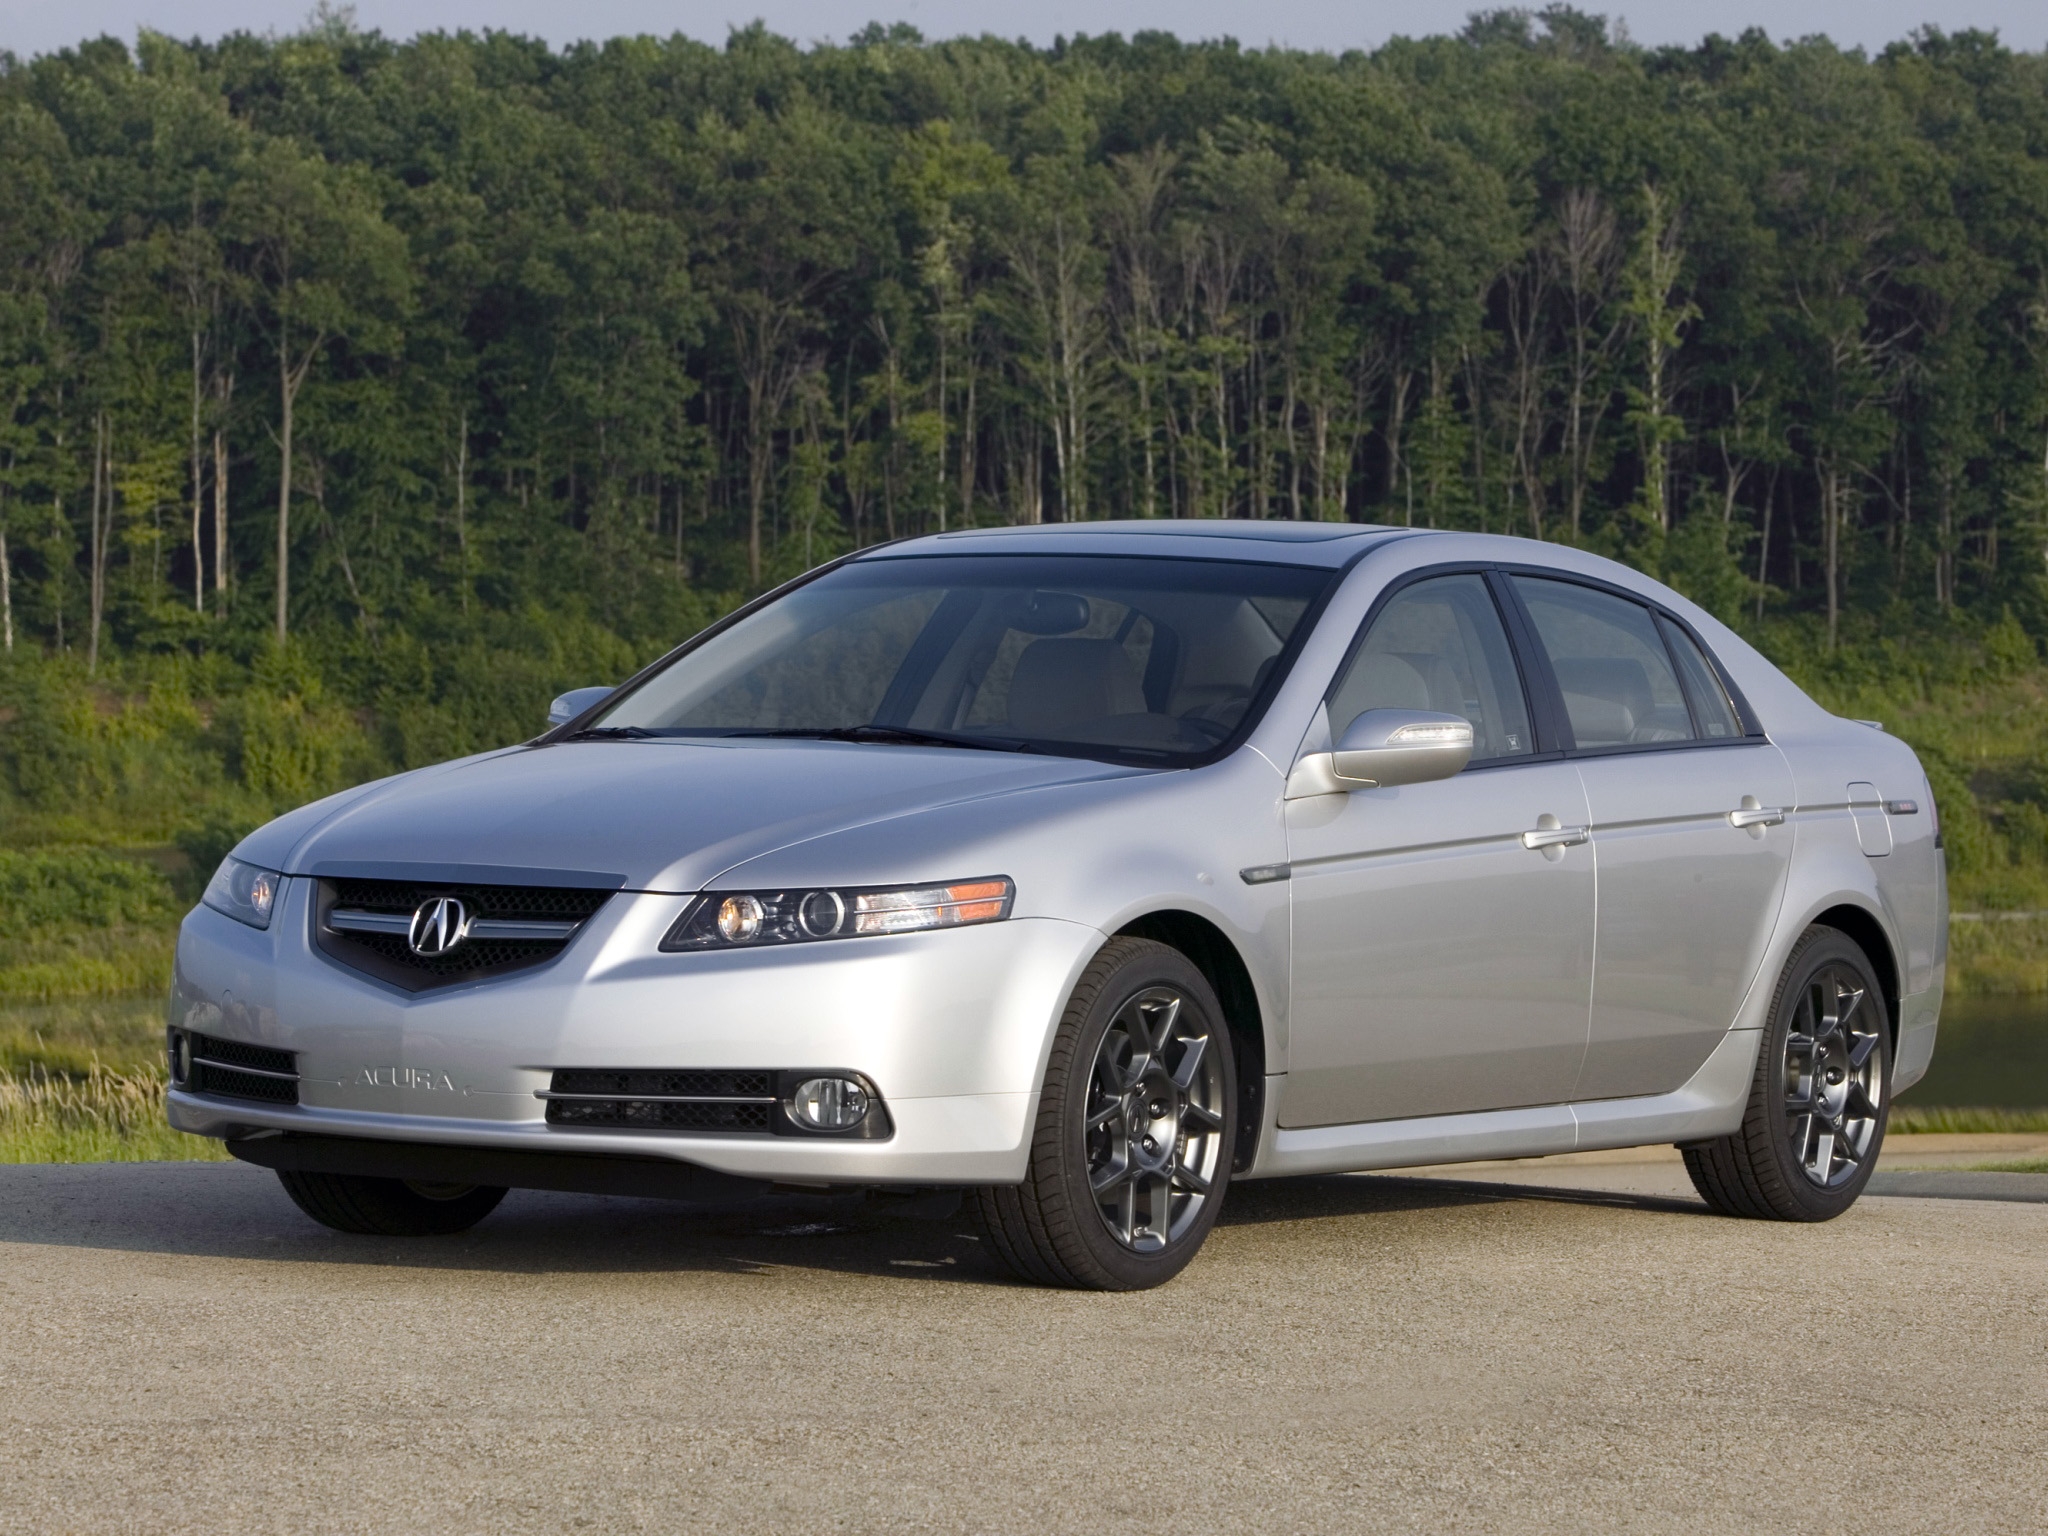 cars, auto, grass, acura, forest, front view, style, akura, shrubs, tl, 2007, silver metallic